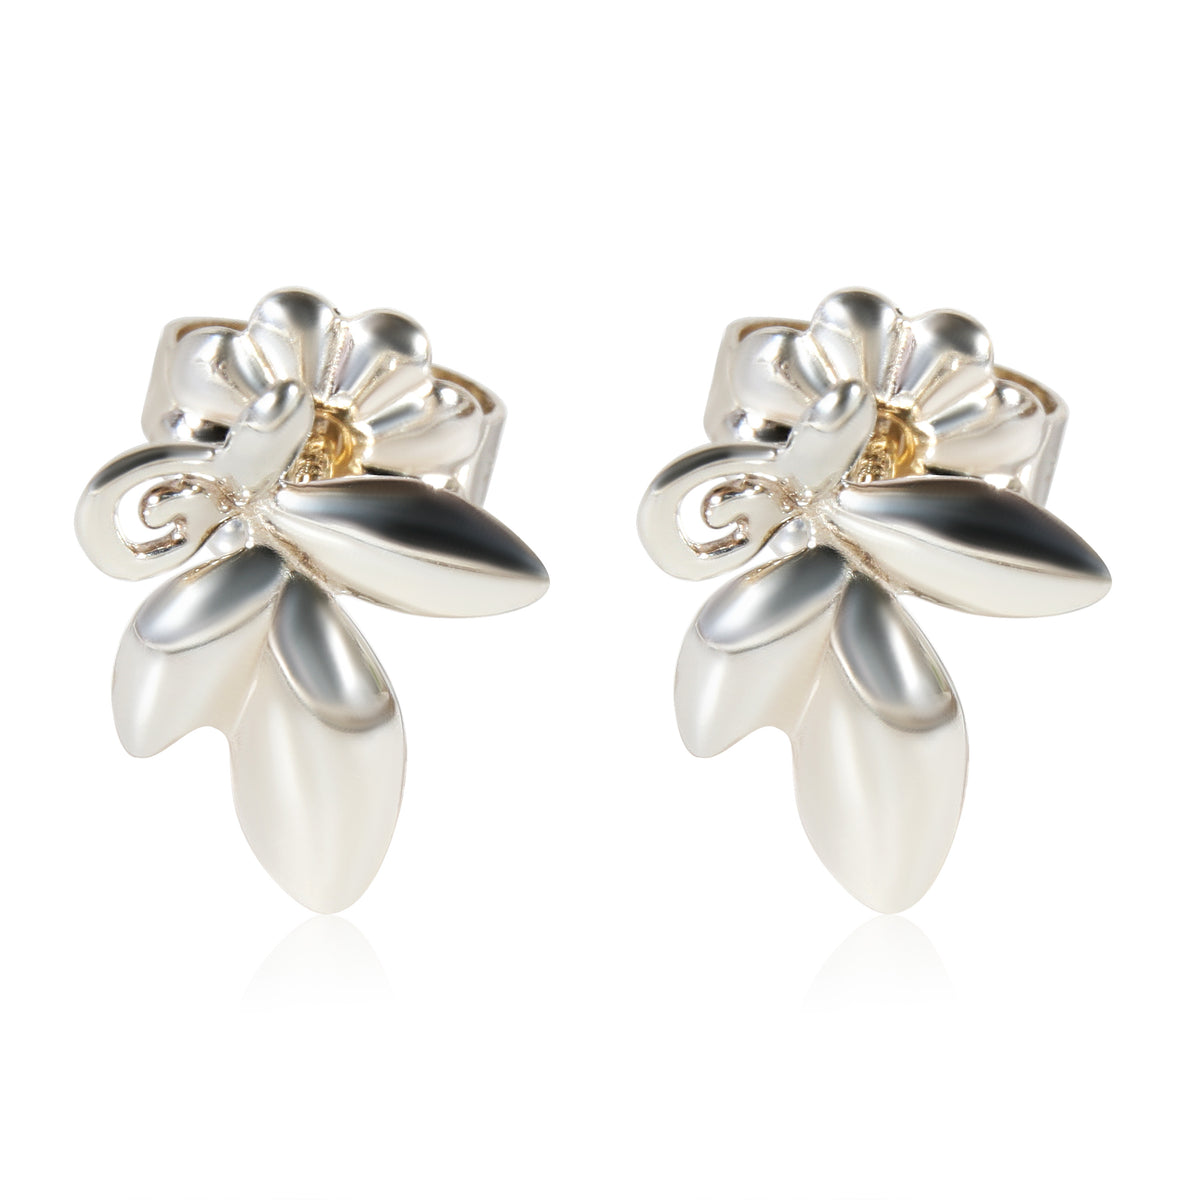 Tiffany & Co. Paloma Picasso Olive Leaf Earrings in Sterling Silver